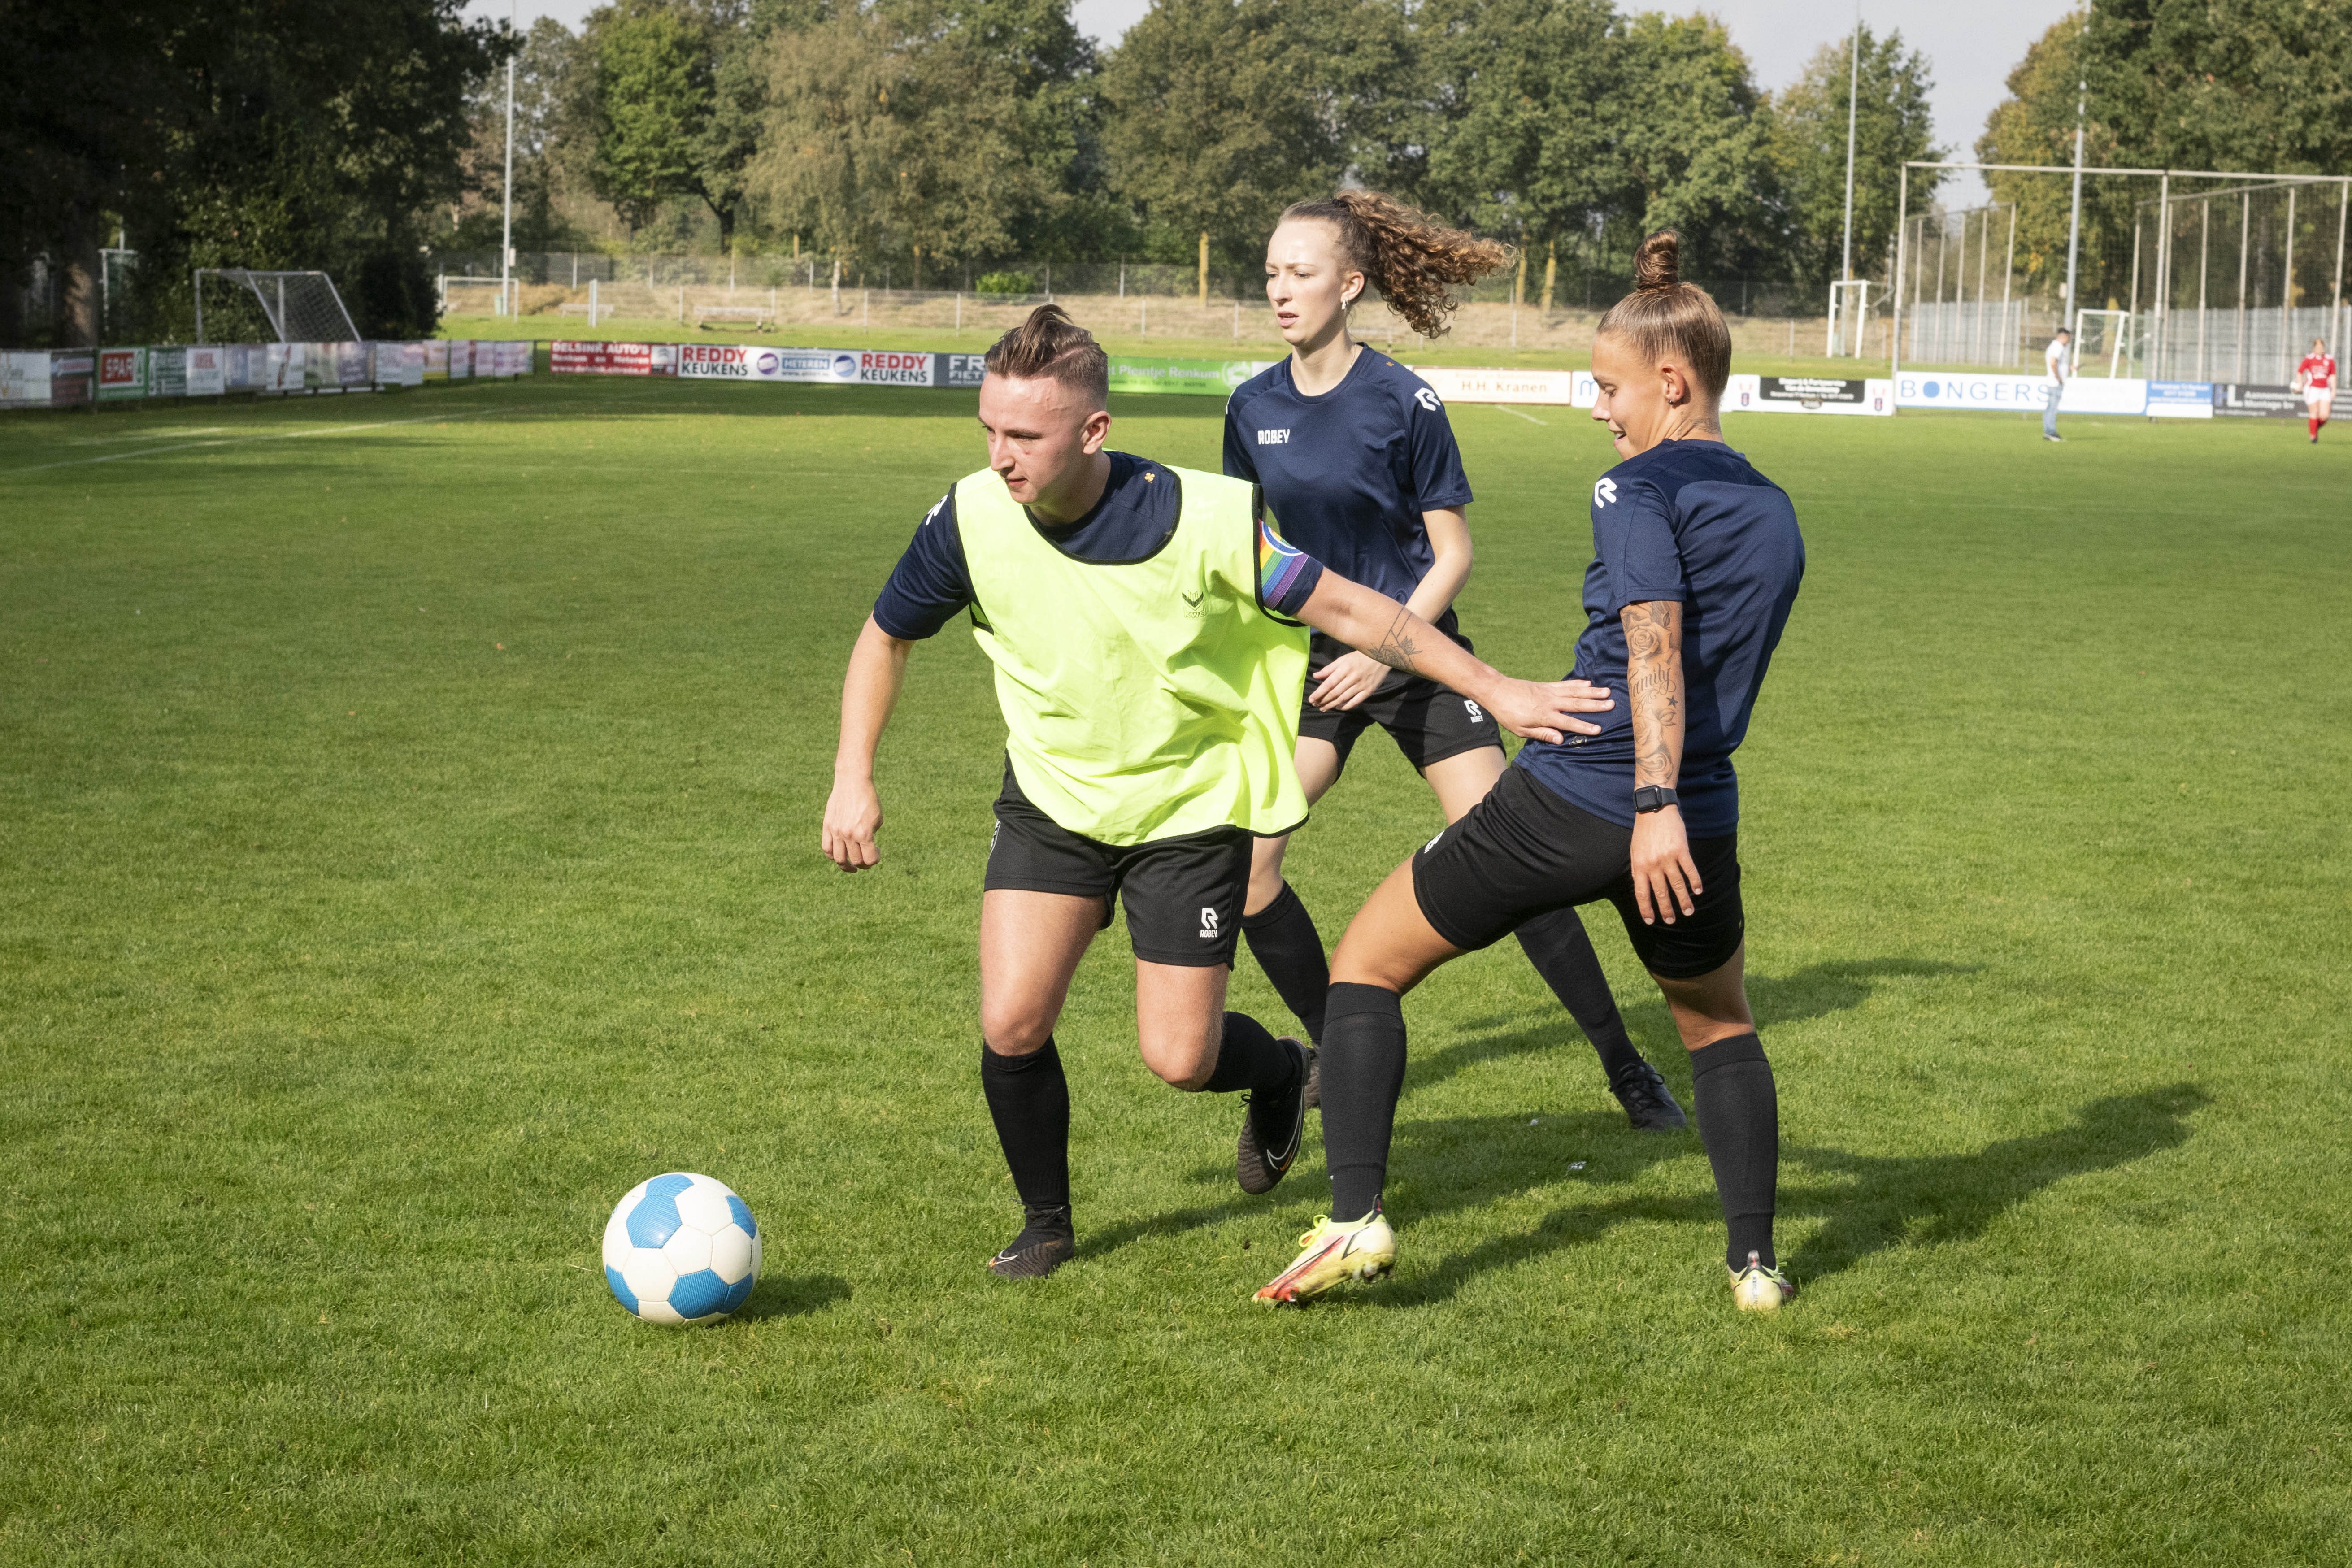 action shot of three people playing football on a sunny day, they're wearing a black and dark blue jersey and one of them has a yellow jersey on top